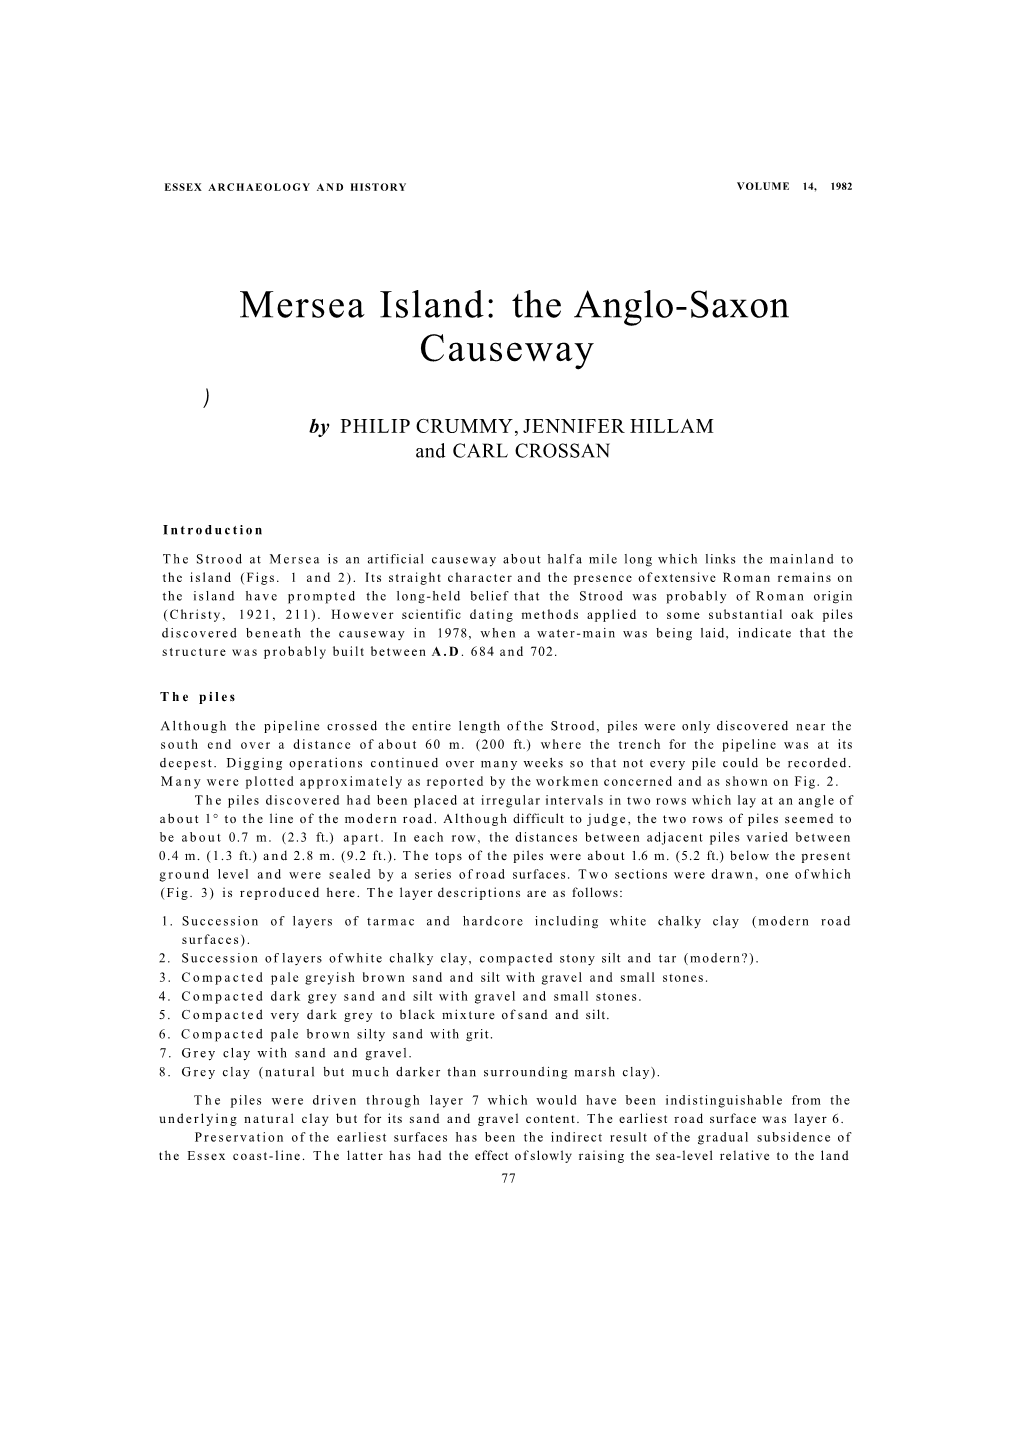 Mersea Island: the Anglo-Saxon Causeway ) by PHILIP CRUMMY, JENNIFER HILLAM and CARL CROSSAN